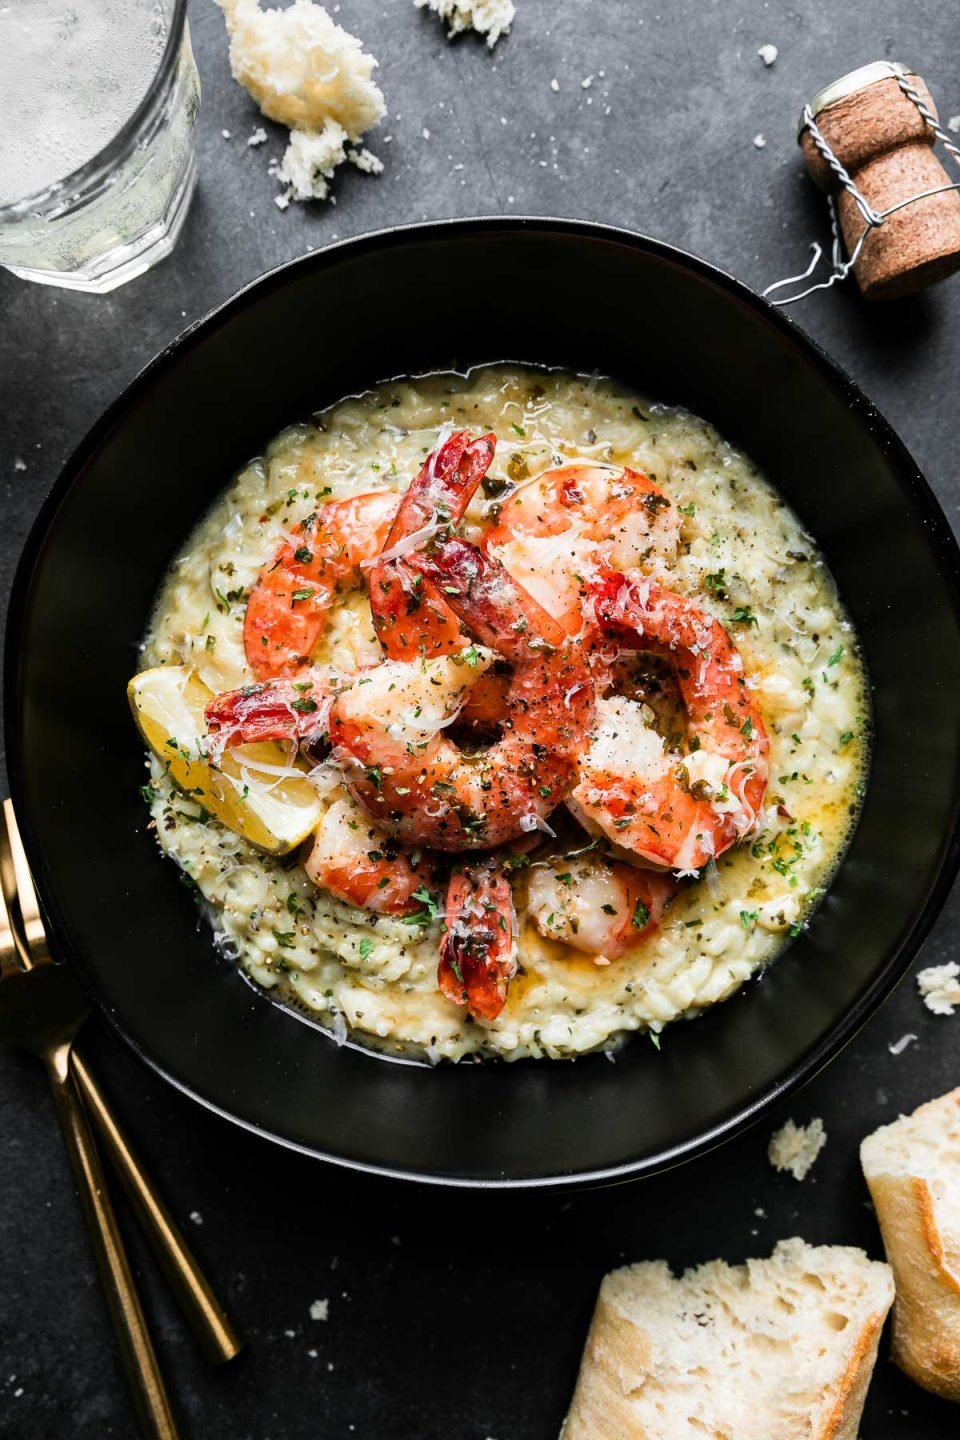 An overhead shot of Prosecco Butter Poached Shrimp served atop a bed of risotto in a black bowl rests atop a black textured surface. A few spoonfuls of poaching liquid have been poured over the shrimp & the dish has been garnished with freshly grated parmesan cheese and a lemon wedge tucked alongside the shrimp. Gold silverware, a few pieces of loose crusty bread for dipping, bits of breadcrumbs, a glass filled with Prosecco, and a Prosecco bottle cork surround the bowl of shrimp.